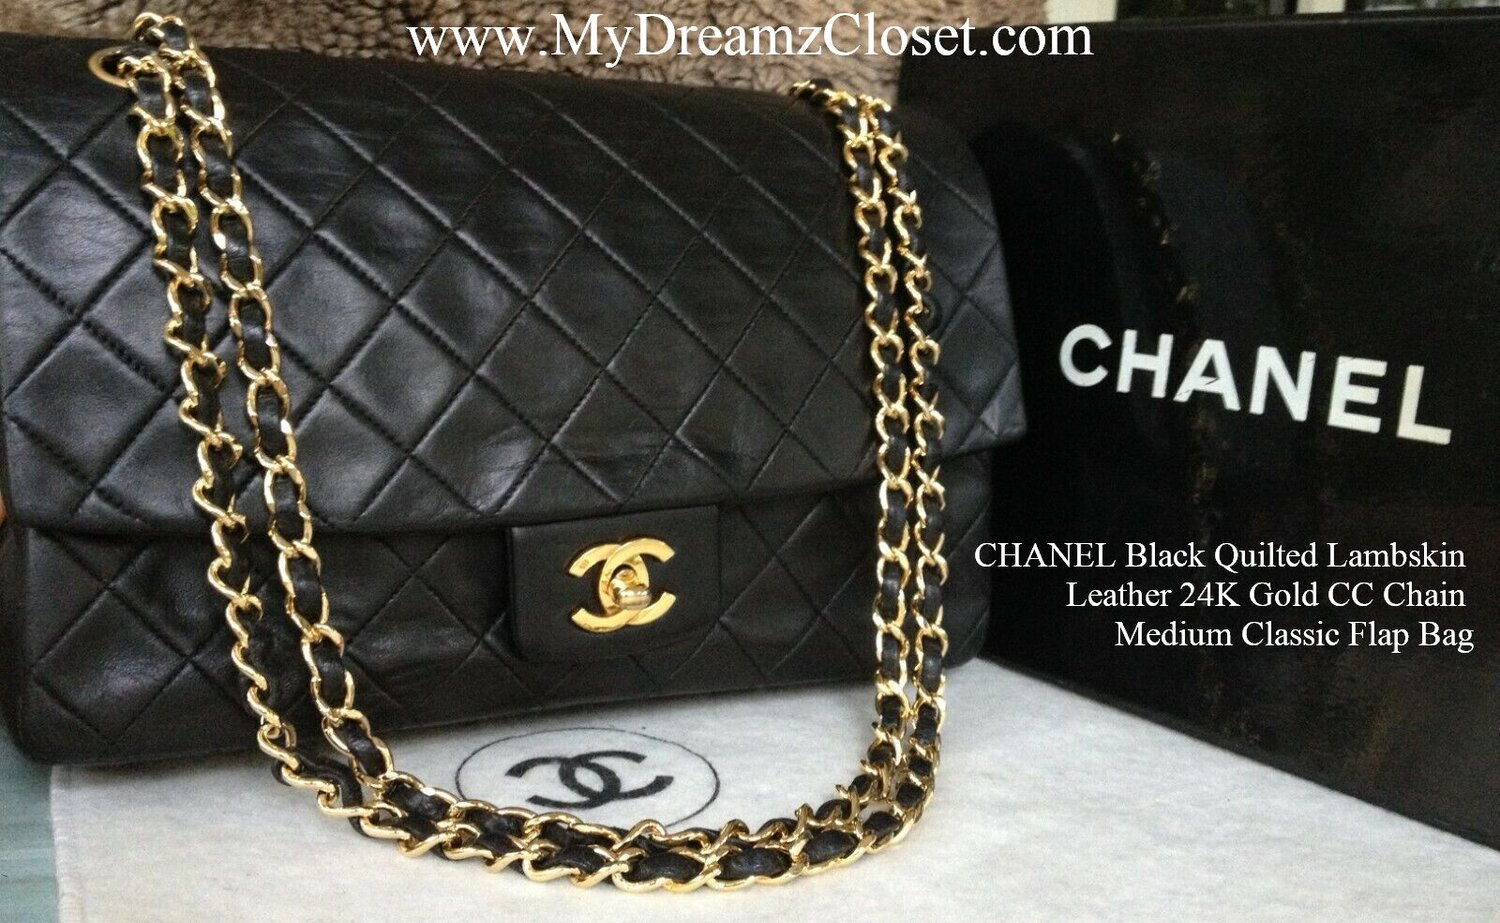 CHANEL Black Quilted Lambskin Leather 24K Gold CC Chain Medium Classic Flap  Bag - My Dreamz Closet